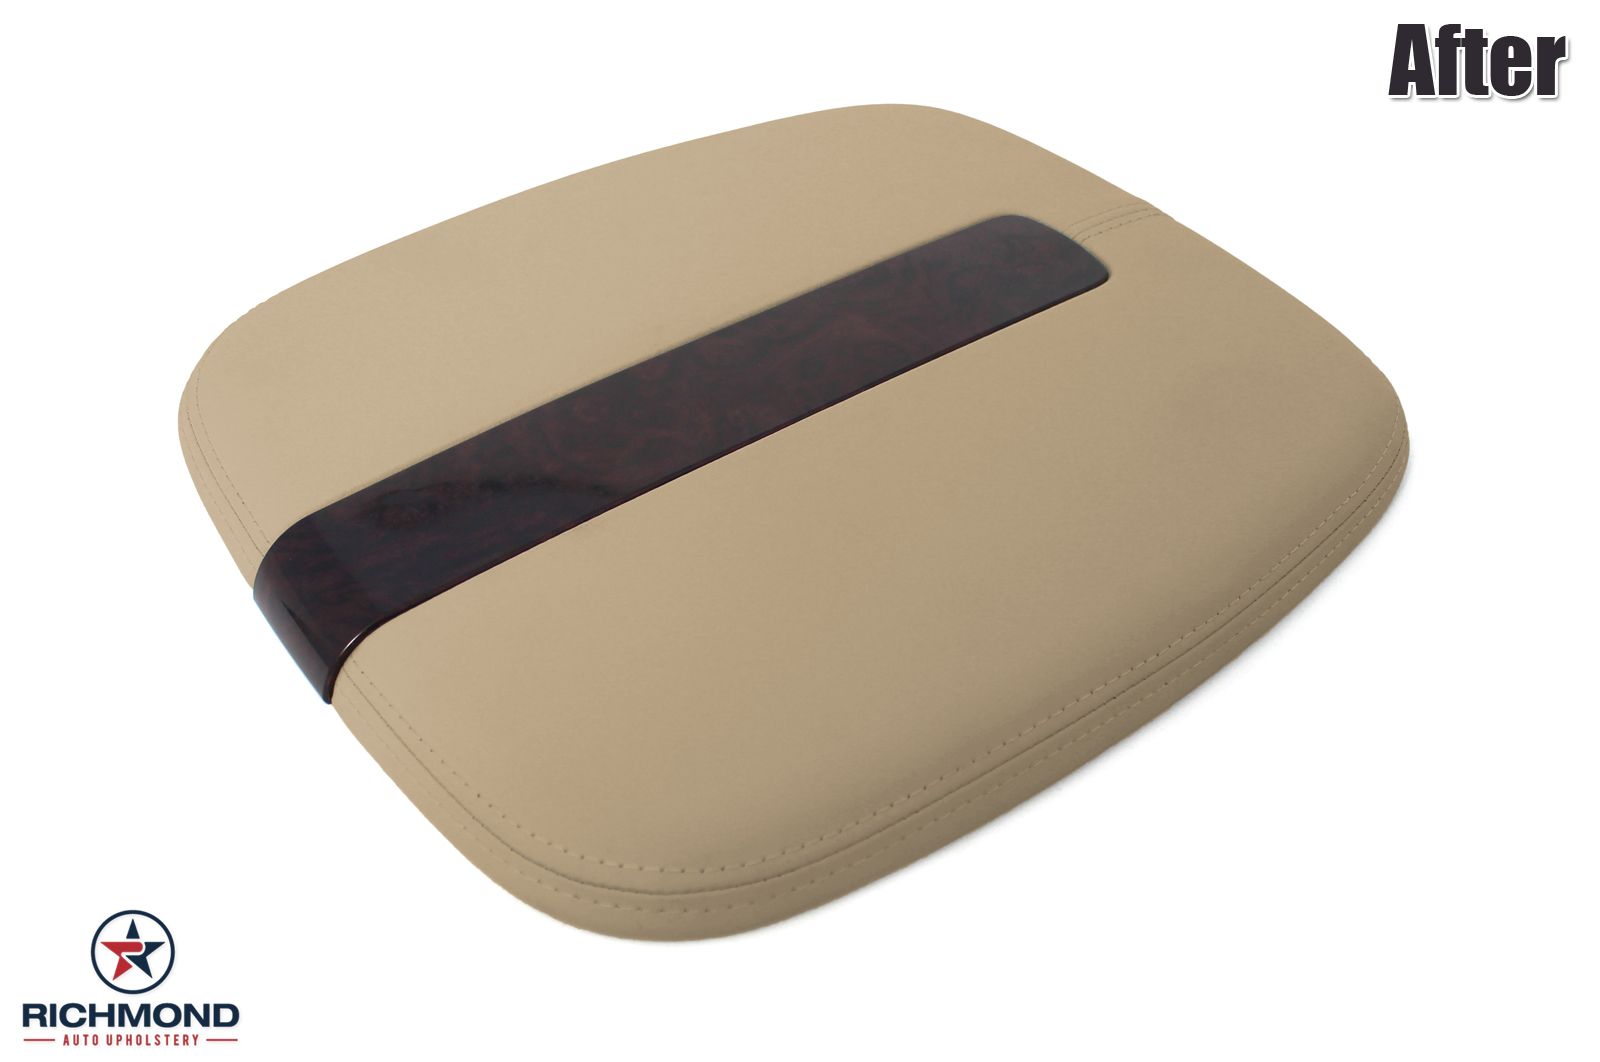  photo Tan-Light-Cashmere-Cadillac-Escalade-Center-Console-Lid-Replacement-Leather-Cover-8_zpsqcpsvobk.jpg